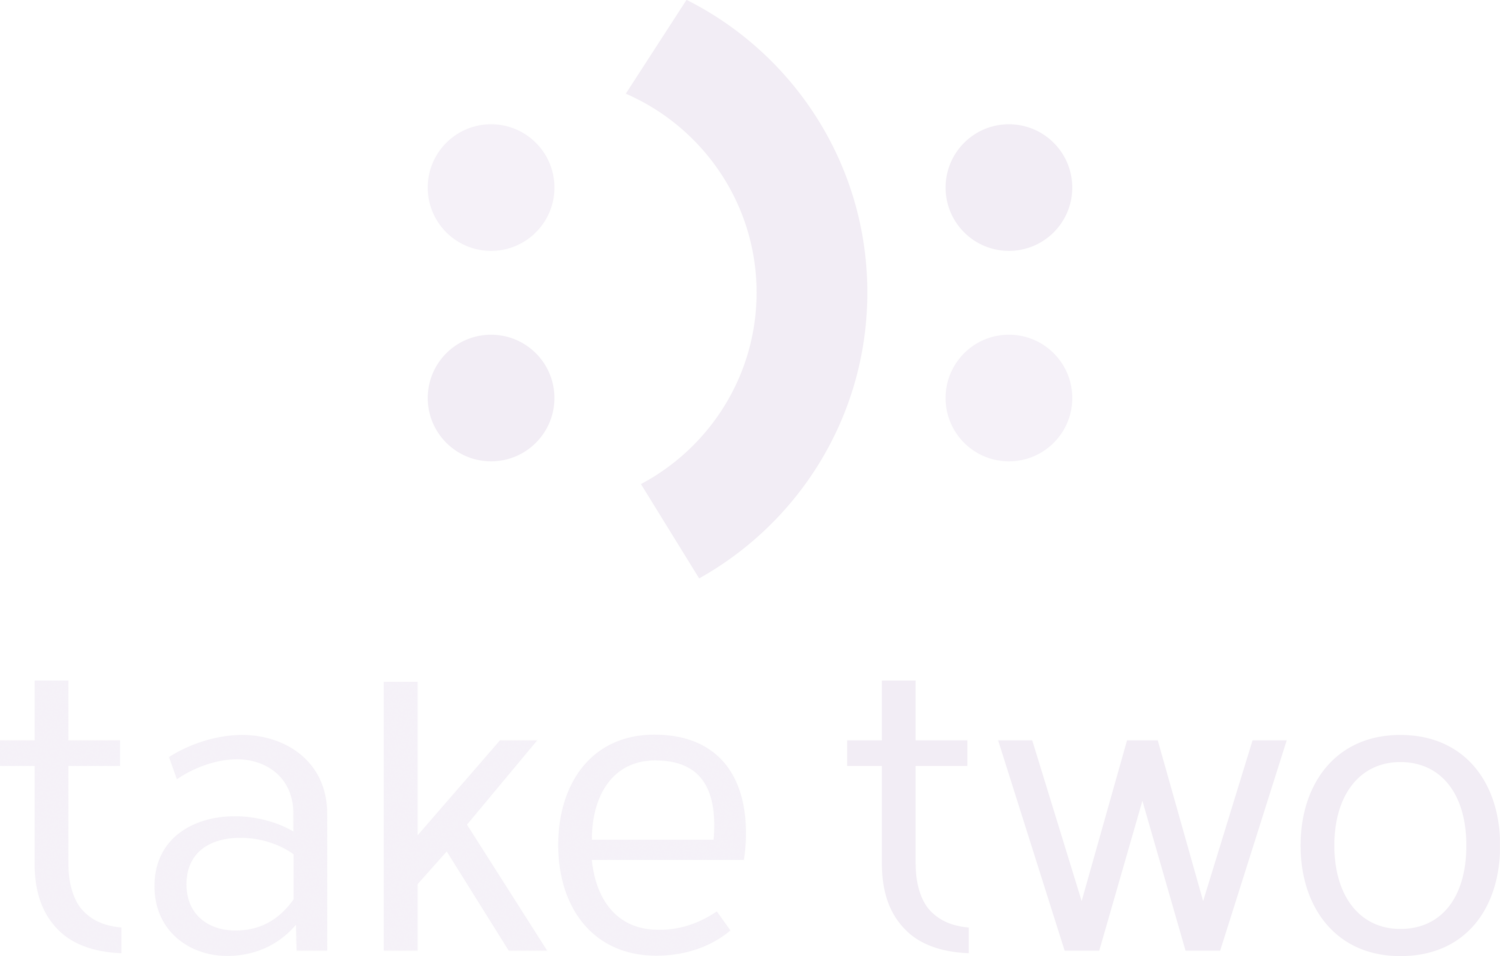 Take Two Productions